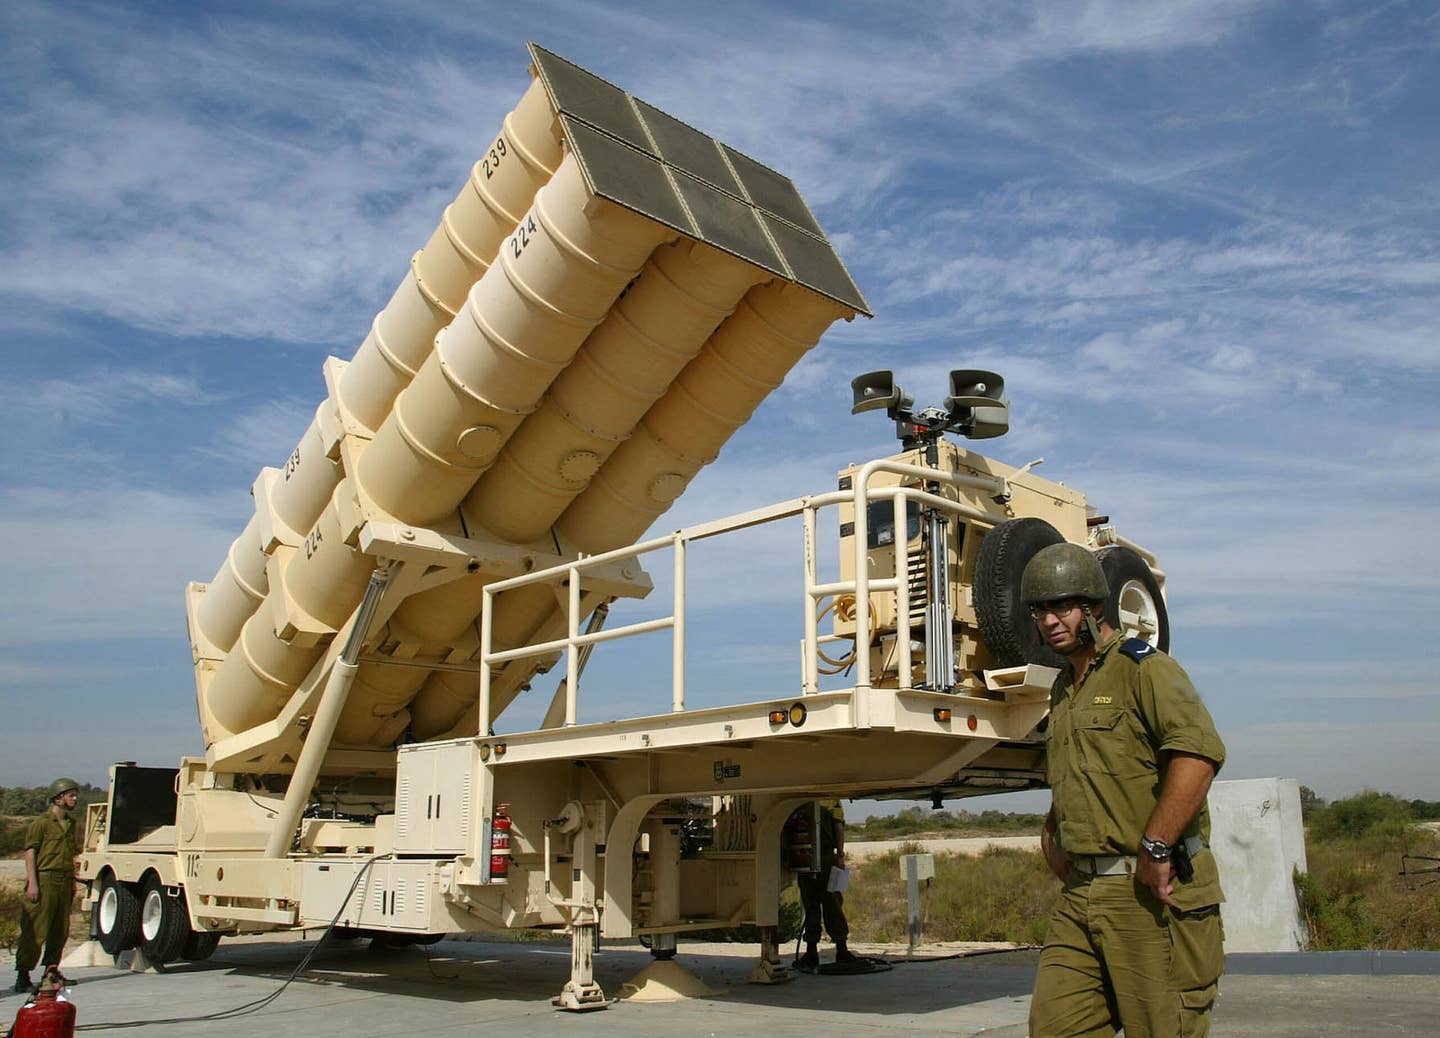 A launcher for six Arrow 2 missiles is raised into launch position at the Israeli Air Force base at Palmahim, on November 7, 2002. <em>Photo by Getty Images</em>